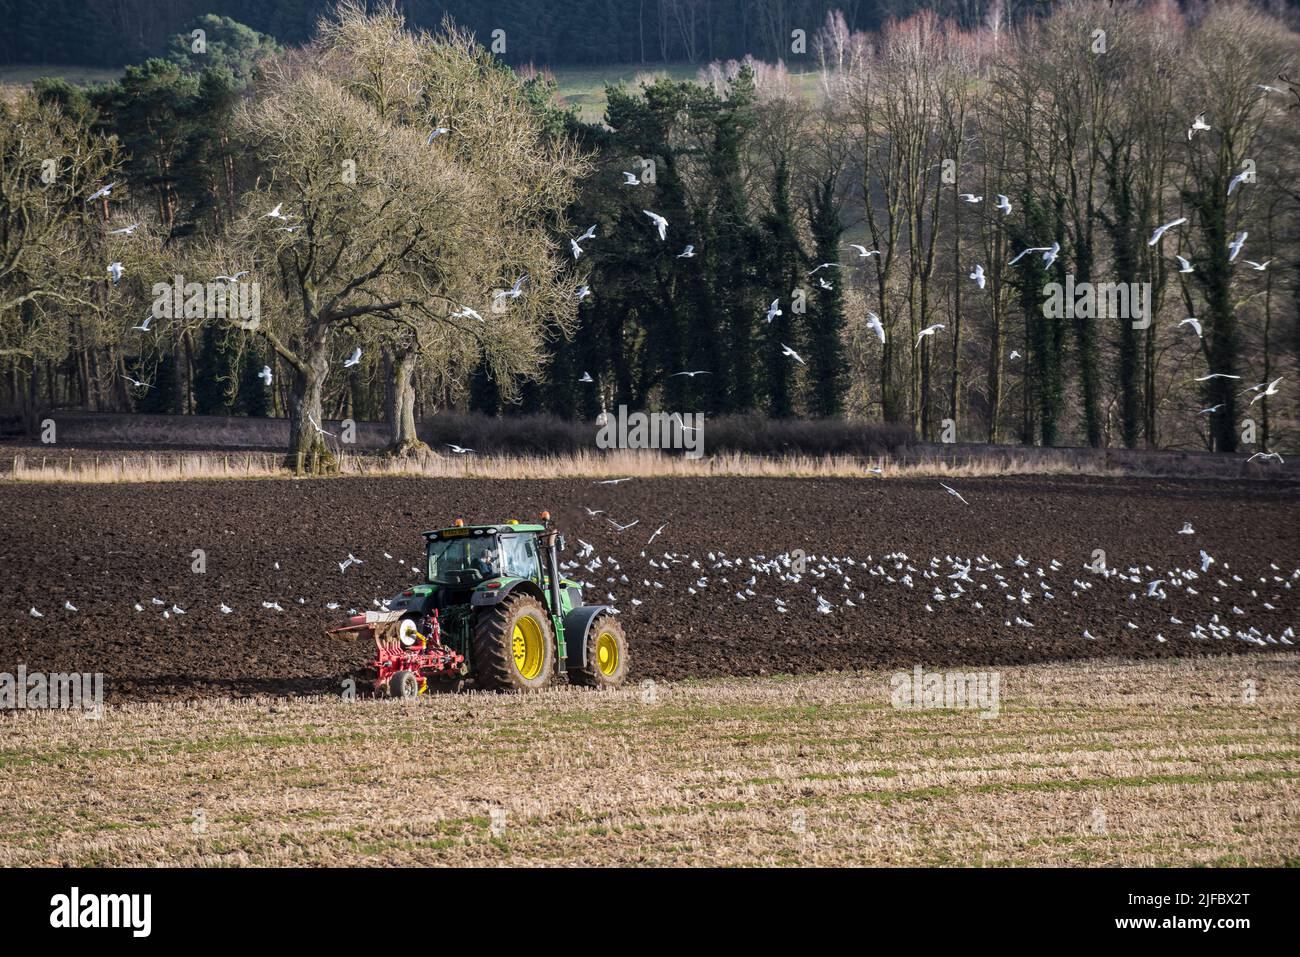 Green tractor with yellow wheels and red plough ploughing a stubble field with gulls wheeling and soaring around; backlit trees in the background. Stock Photo